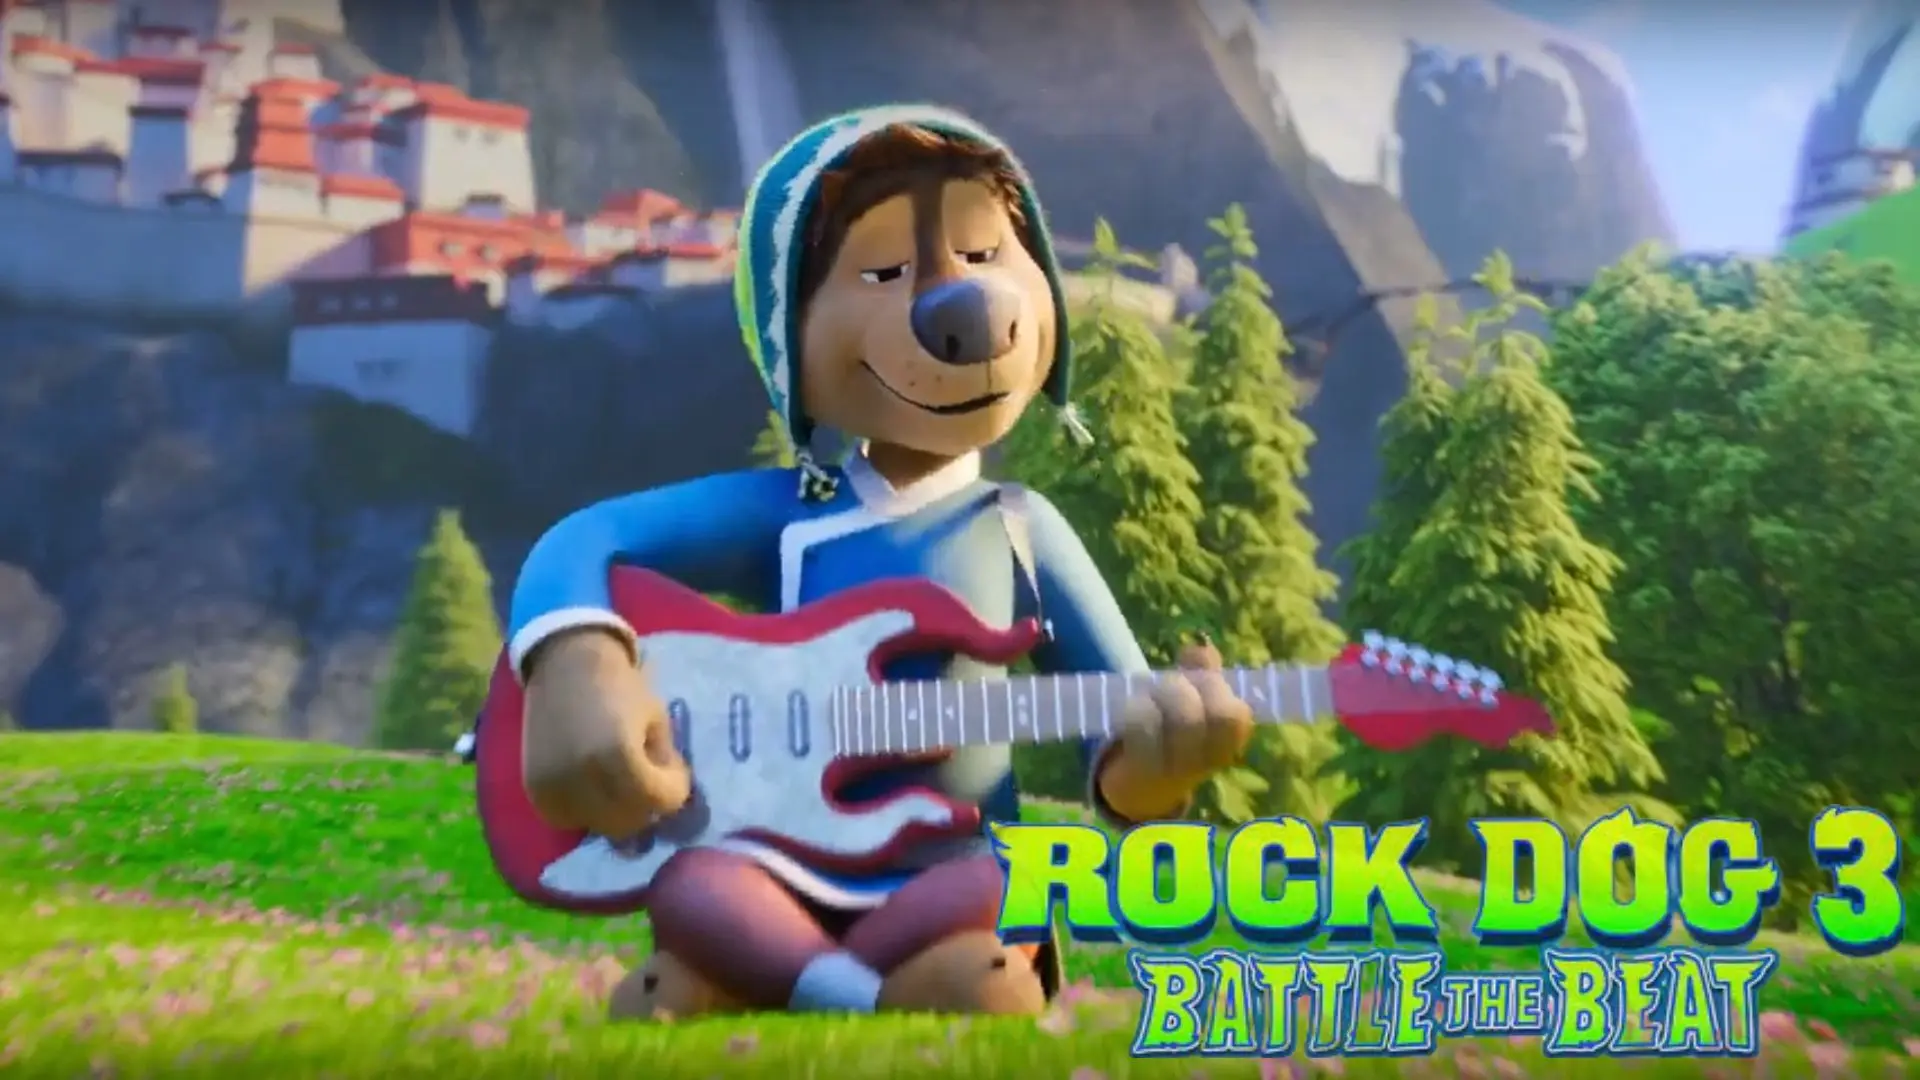 Rock Dog 3 Battle the Beat Parents guide and Age Rating